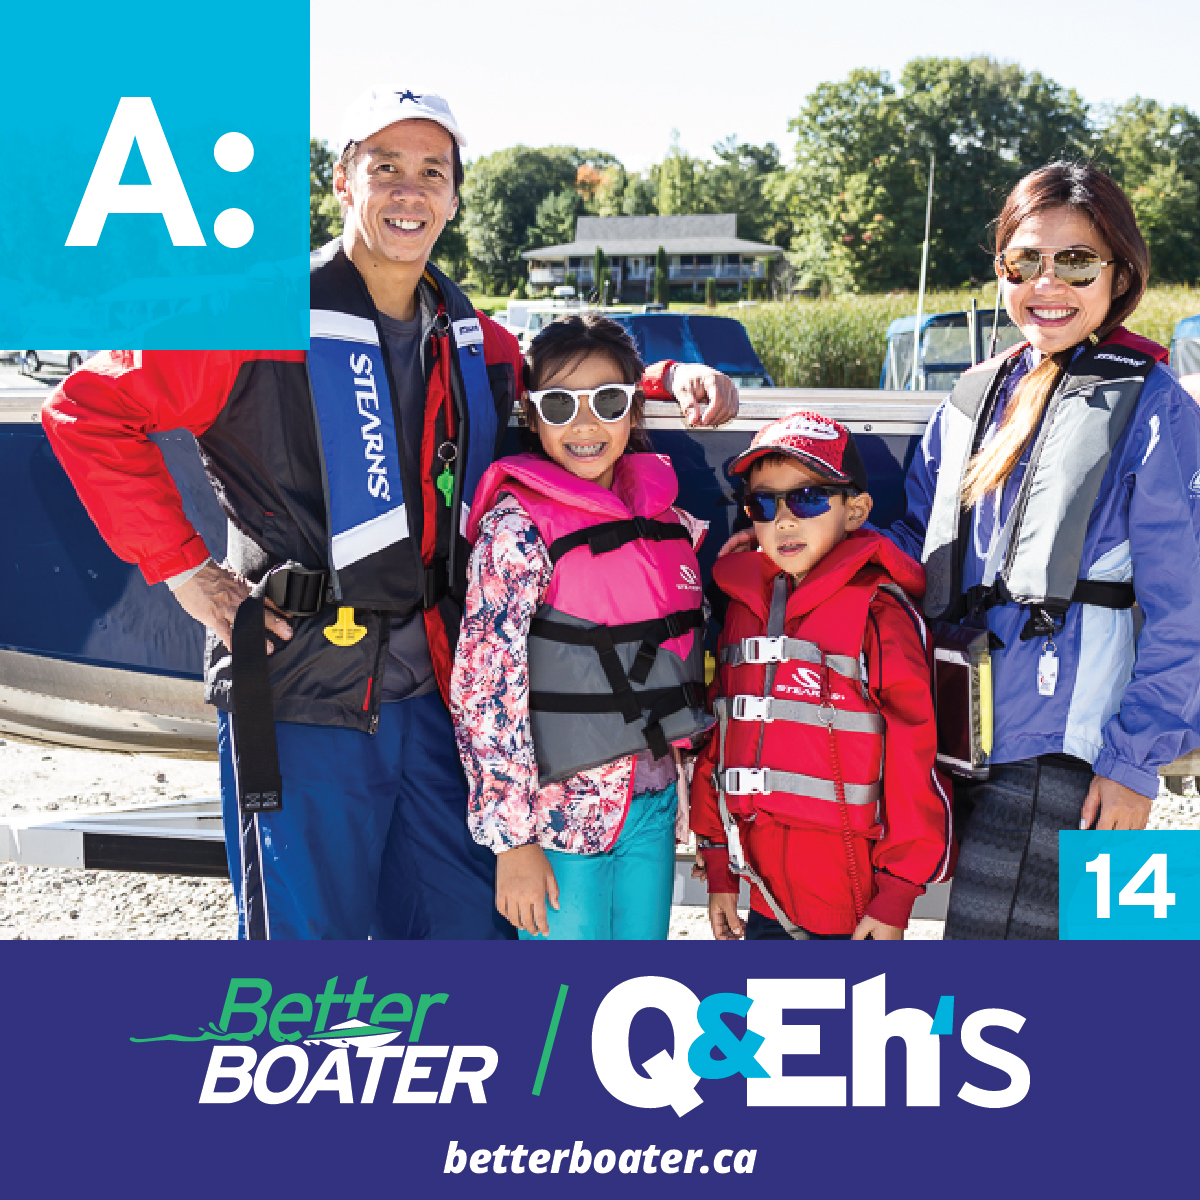 https://betterboater.ca/PFD%20Accessible